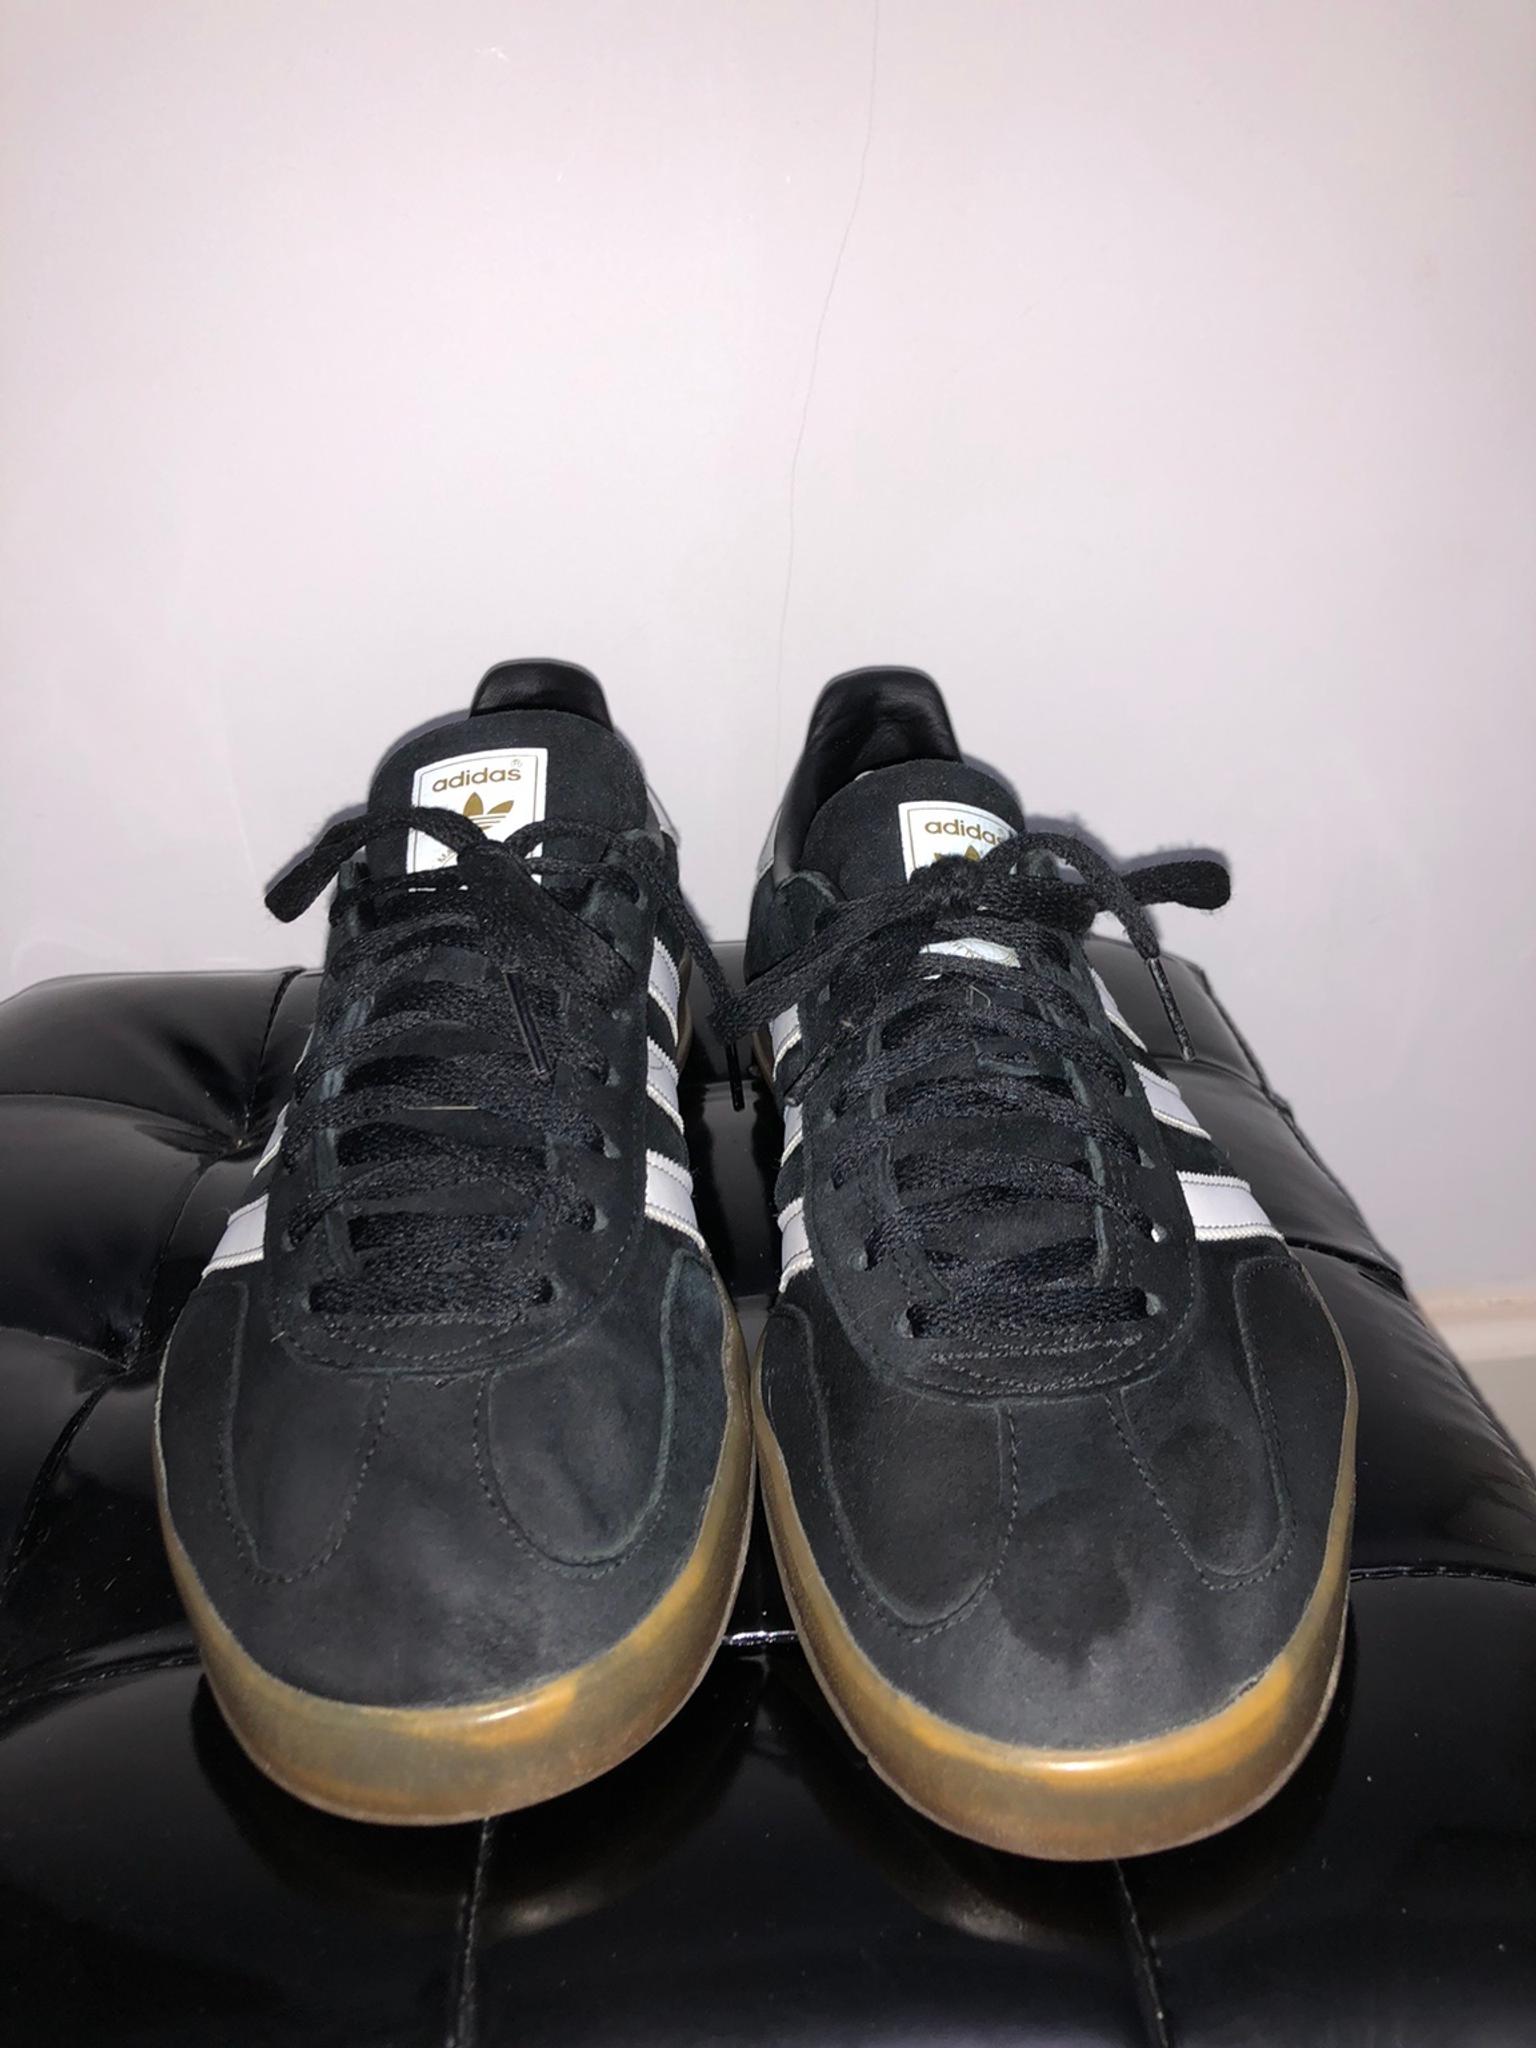 Adidas Gazelle Indoor 2015 Size 9 in B36 Solihull for £25.00 for sale |  Shpock